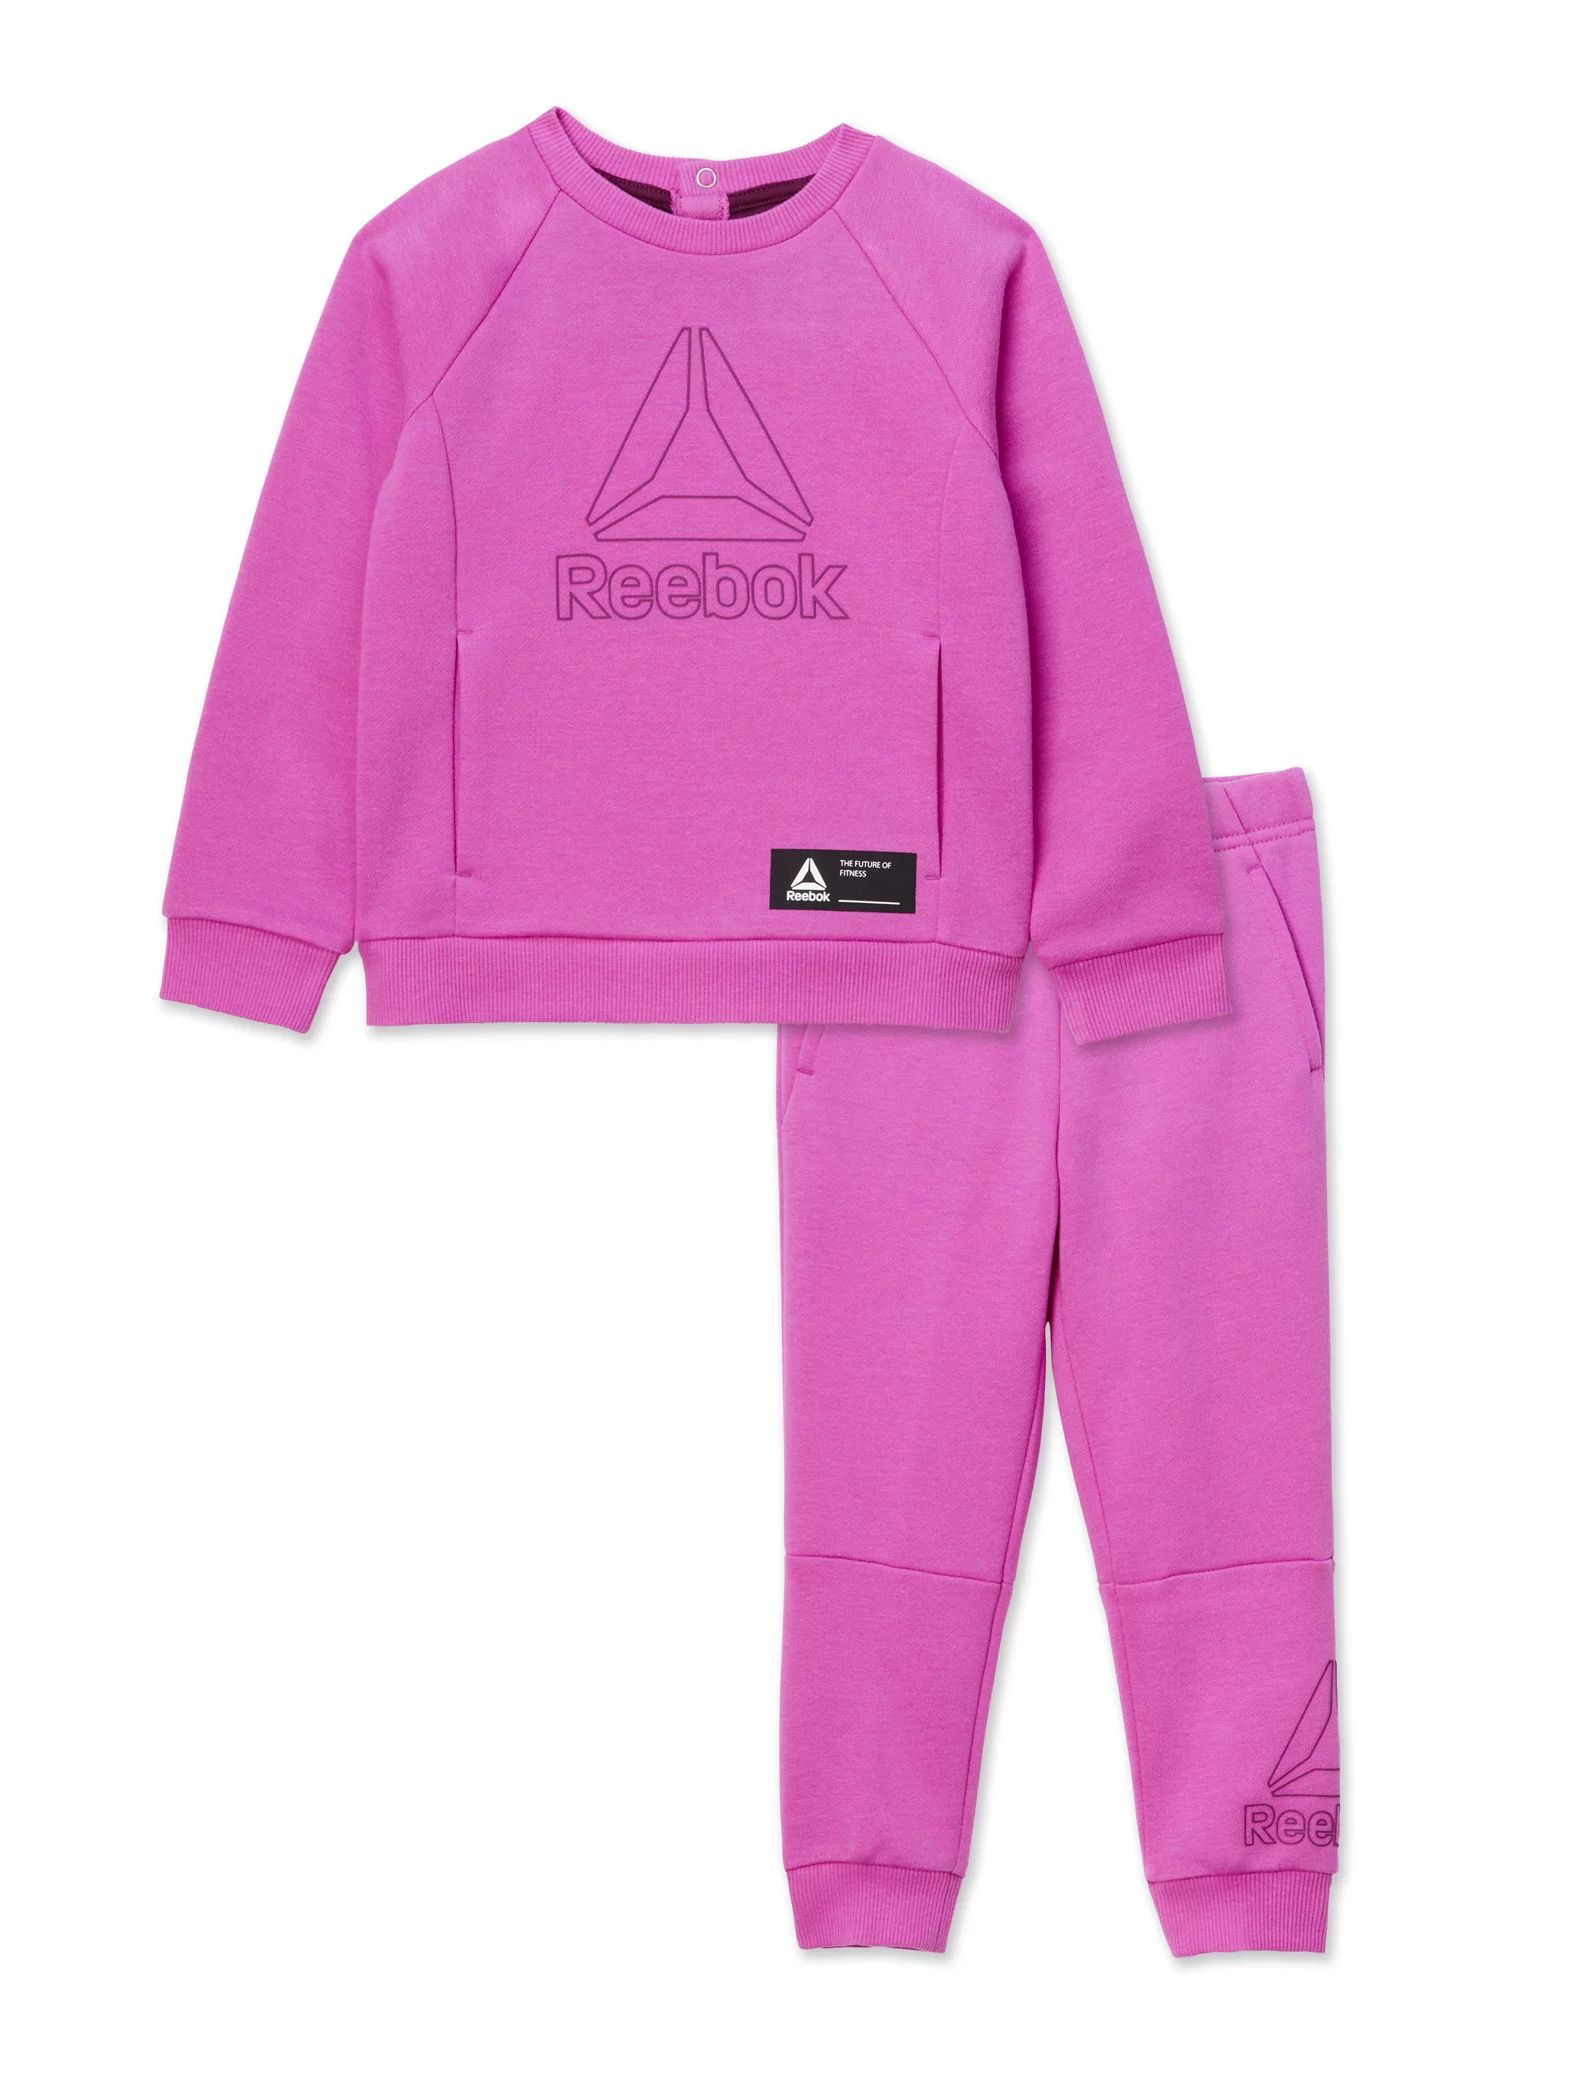 Reebok Toddler Girls Game On Pullover Crew And Jogger Set, 2-Piece, Sizes 12M-5T | Walmart (US)